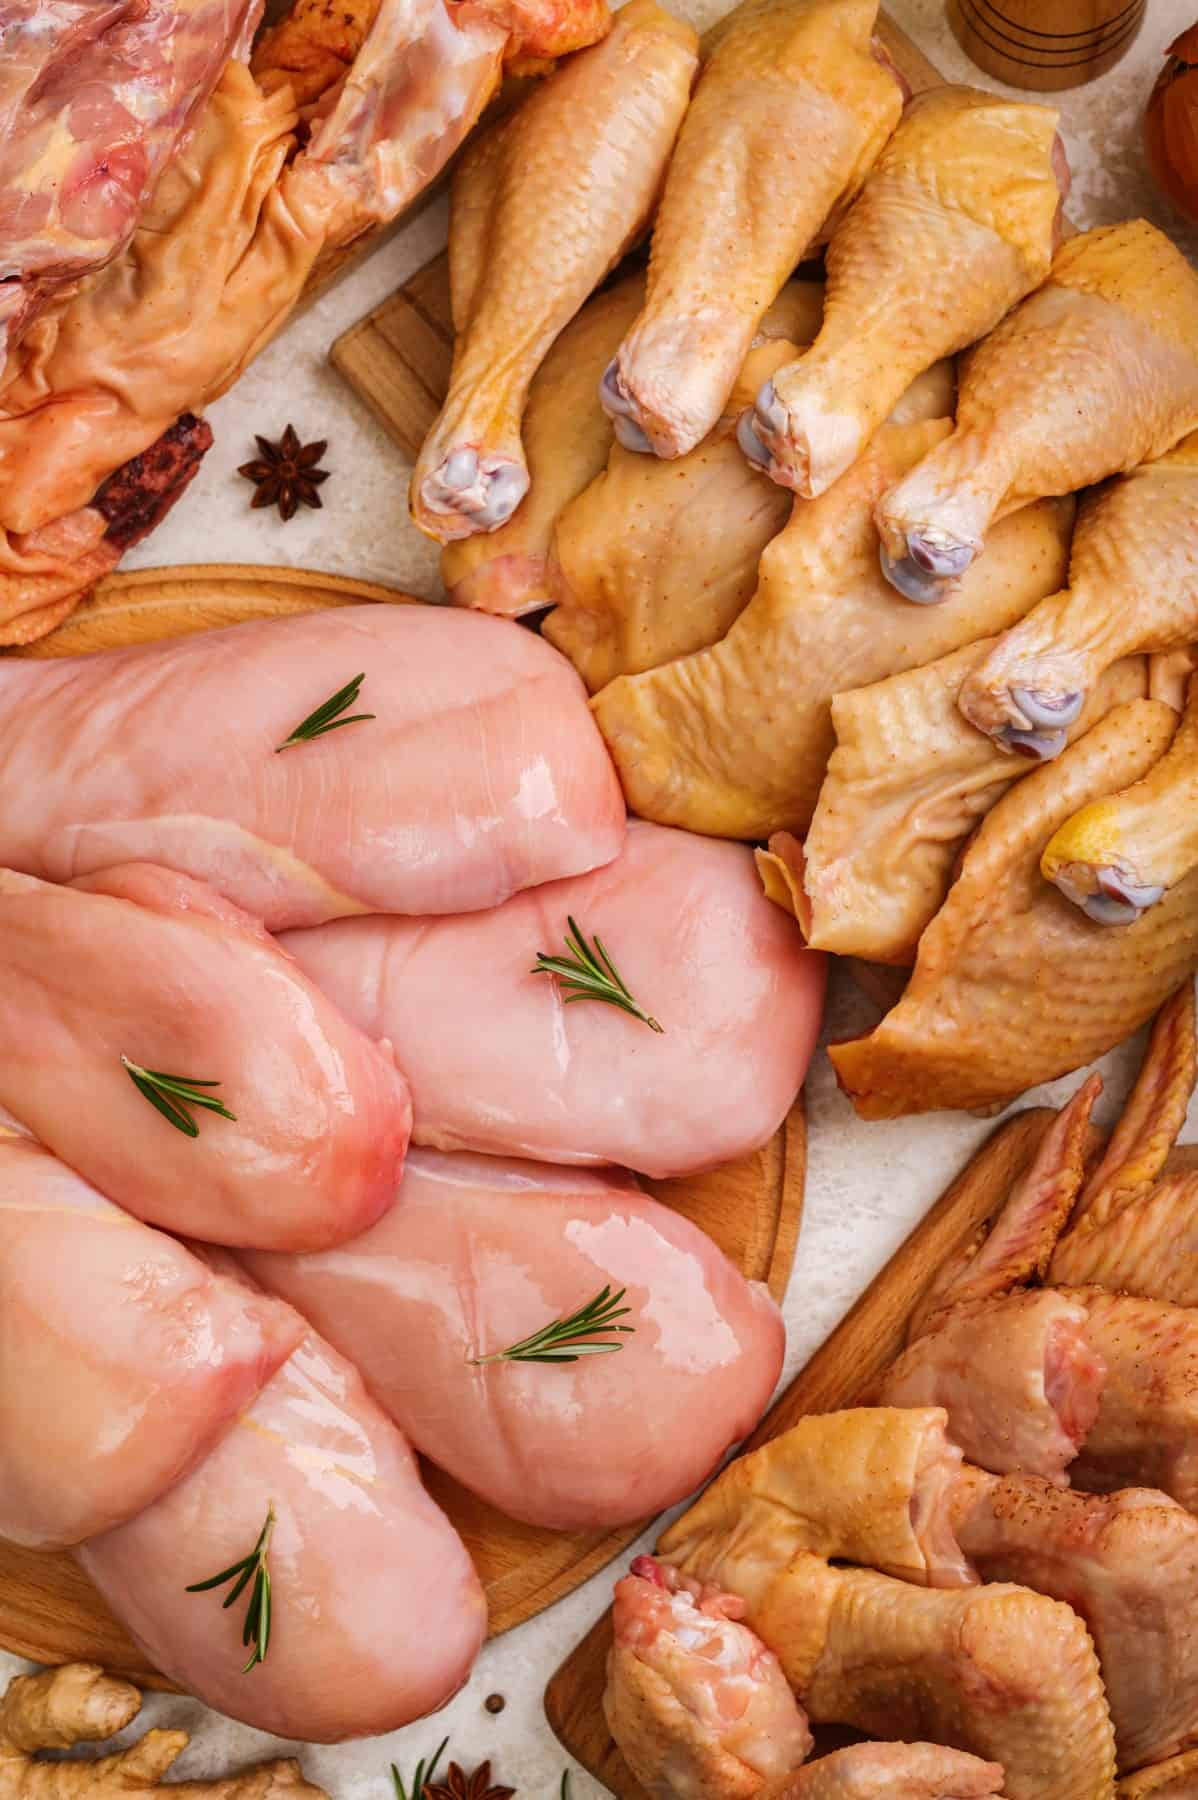 Fresh chicken platter from different parts of chickens - thighs, legs, wings. Assorted raw meat. Fresh farm food.